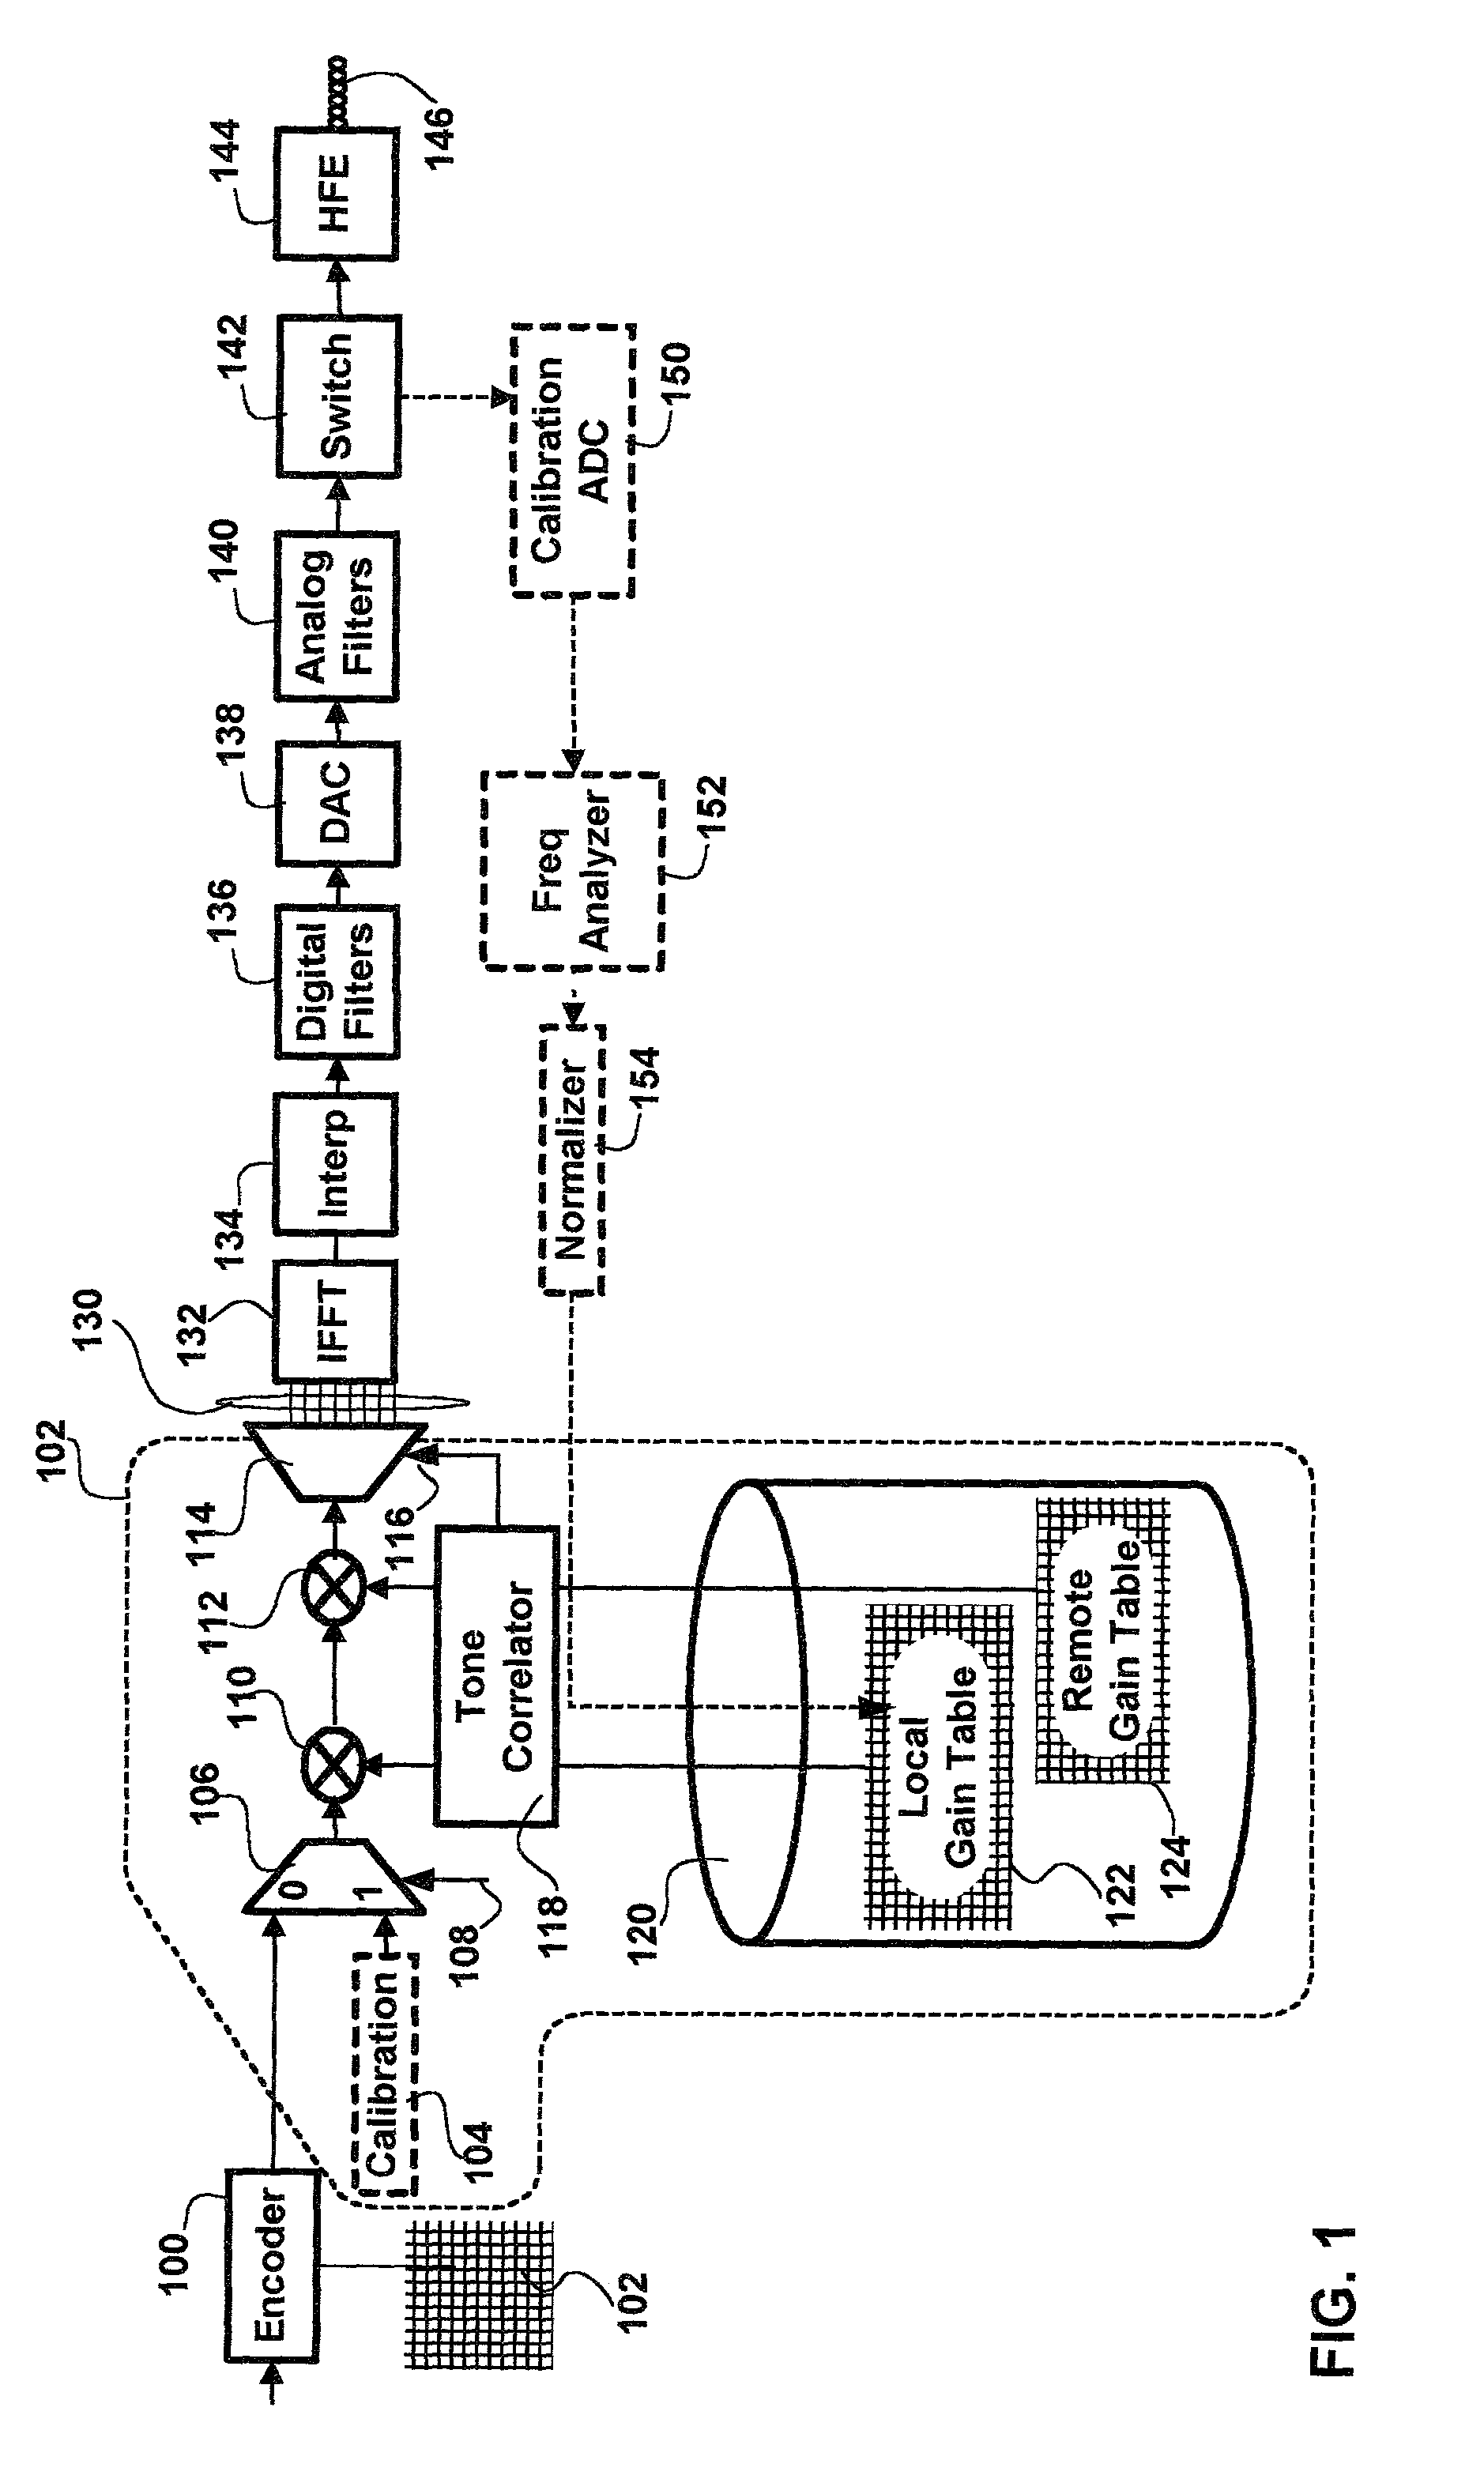 Method and apparatus for pre-compensation of an XDSL modem